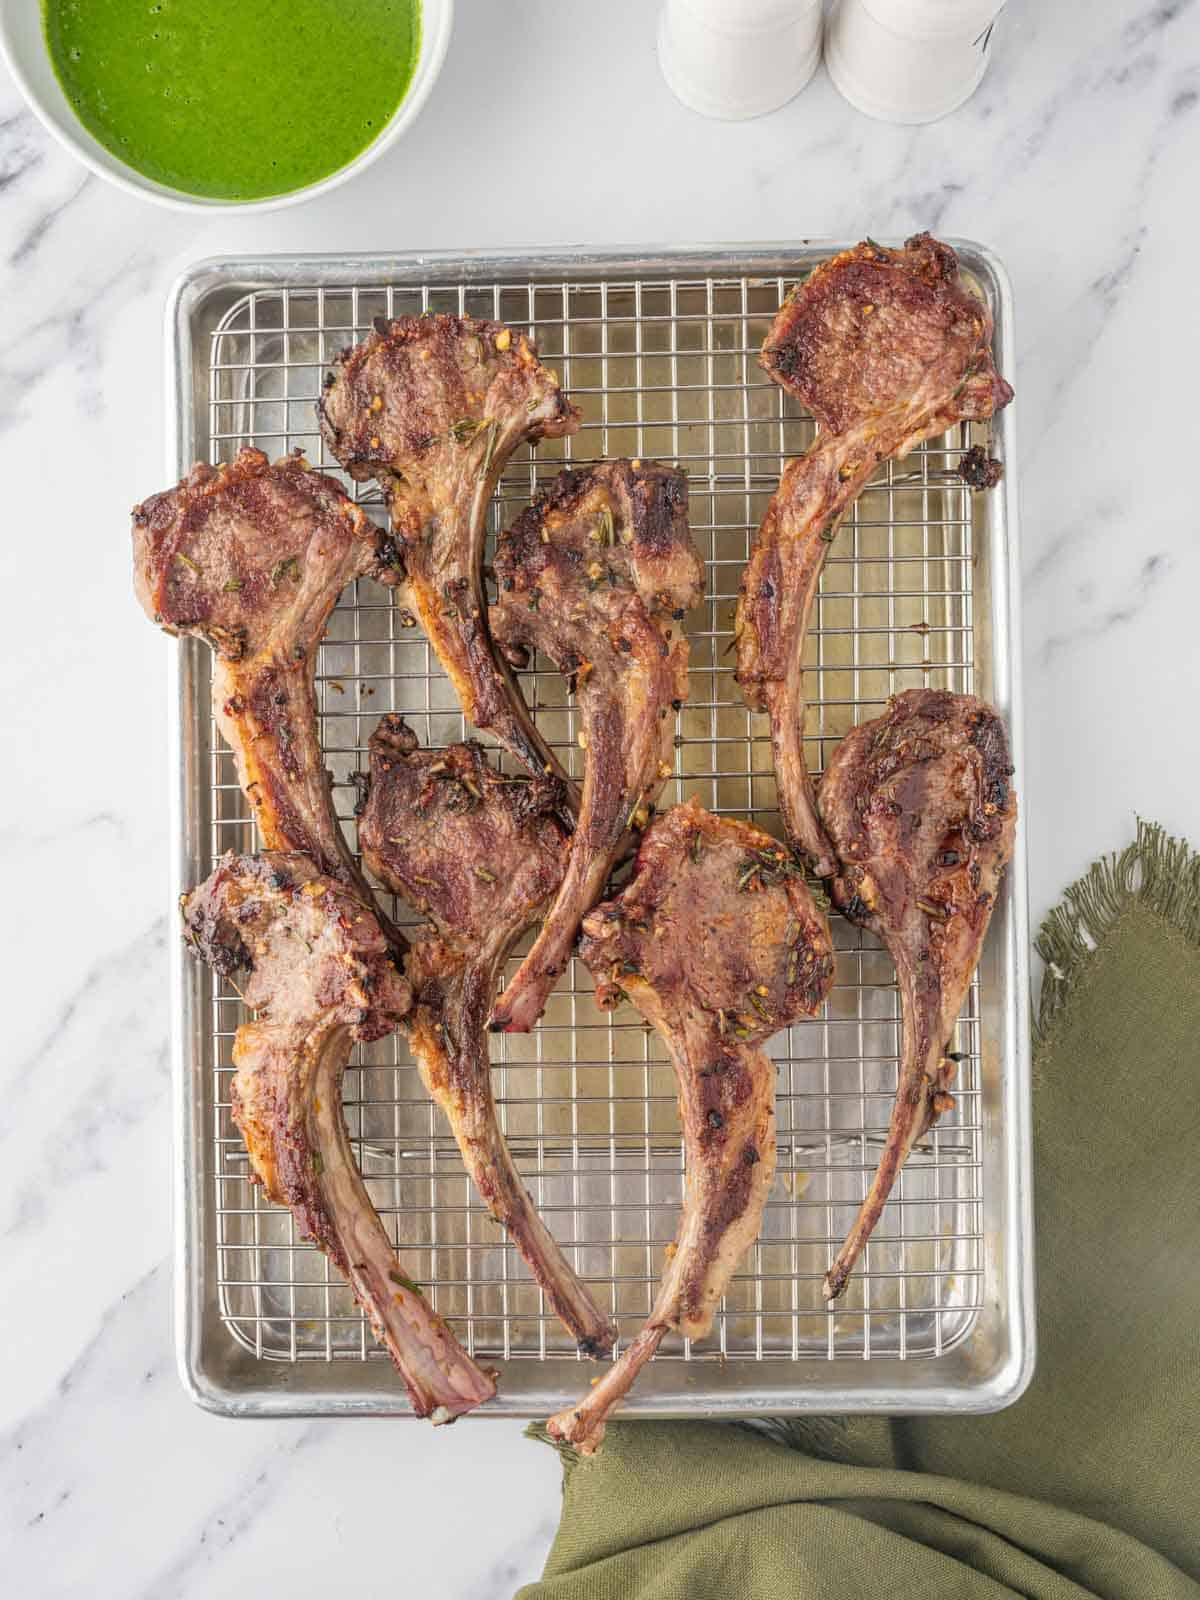 Grilled lamb chops resting on a platter.